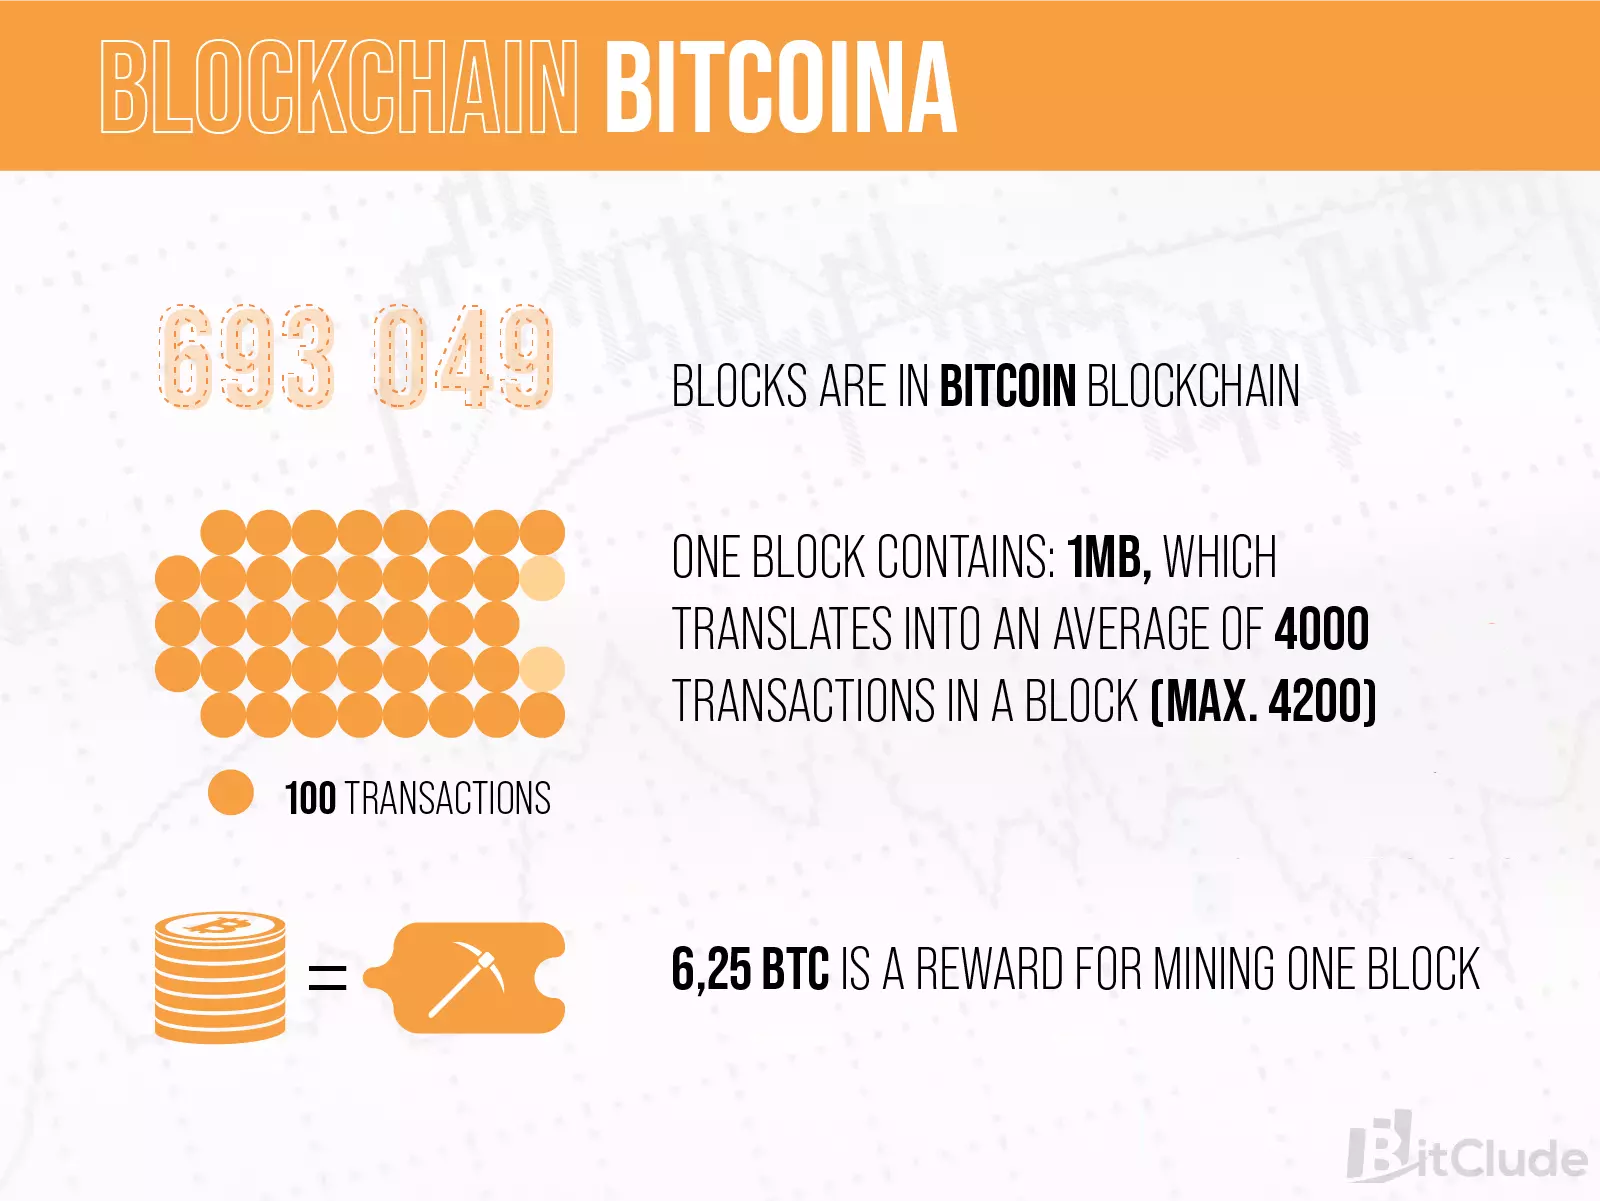 Bitcoins blockchain consists of 693,049 blocks. There are approximately 4,000 transactions in each block.